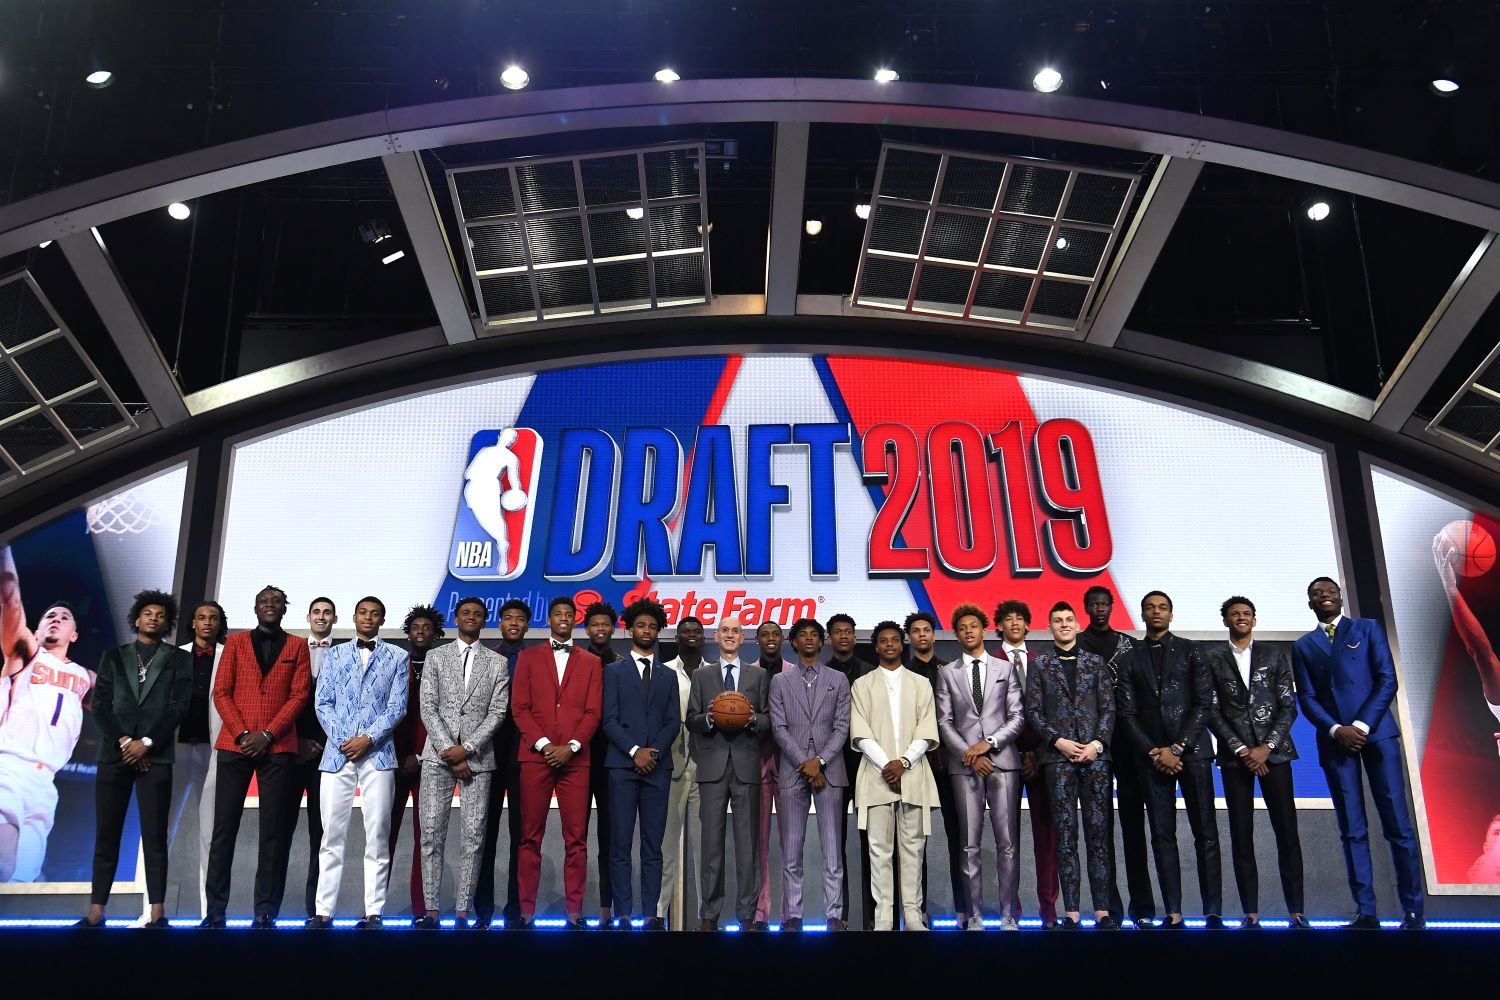 The NBA draft has produced some all-time greats over the years. But who holds the honor of being the first player drafted in the NBA?